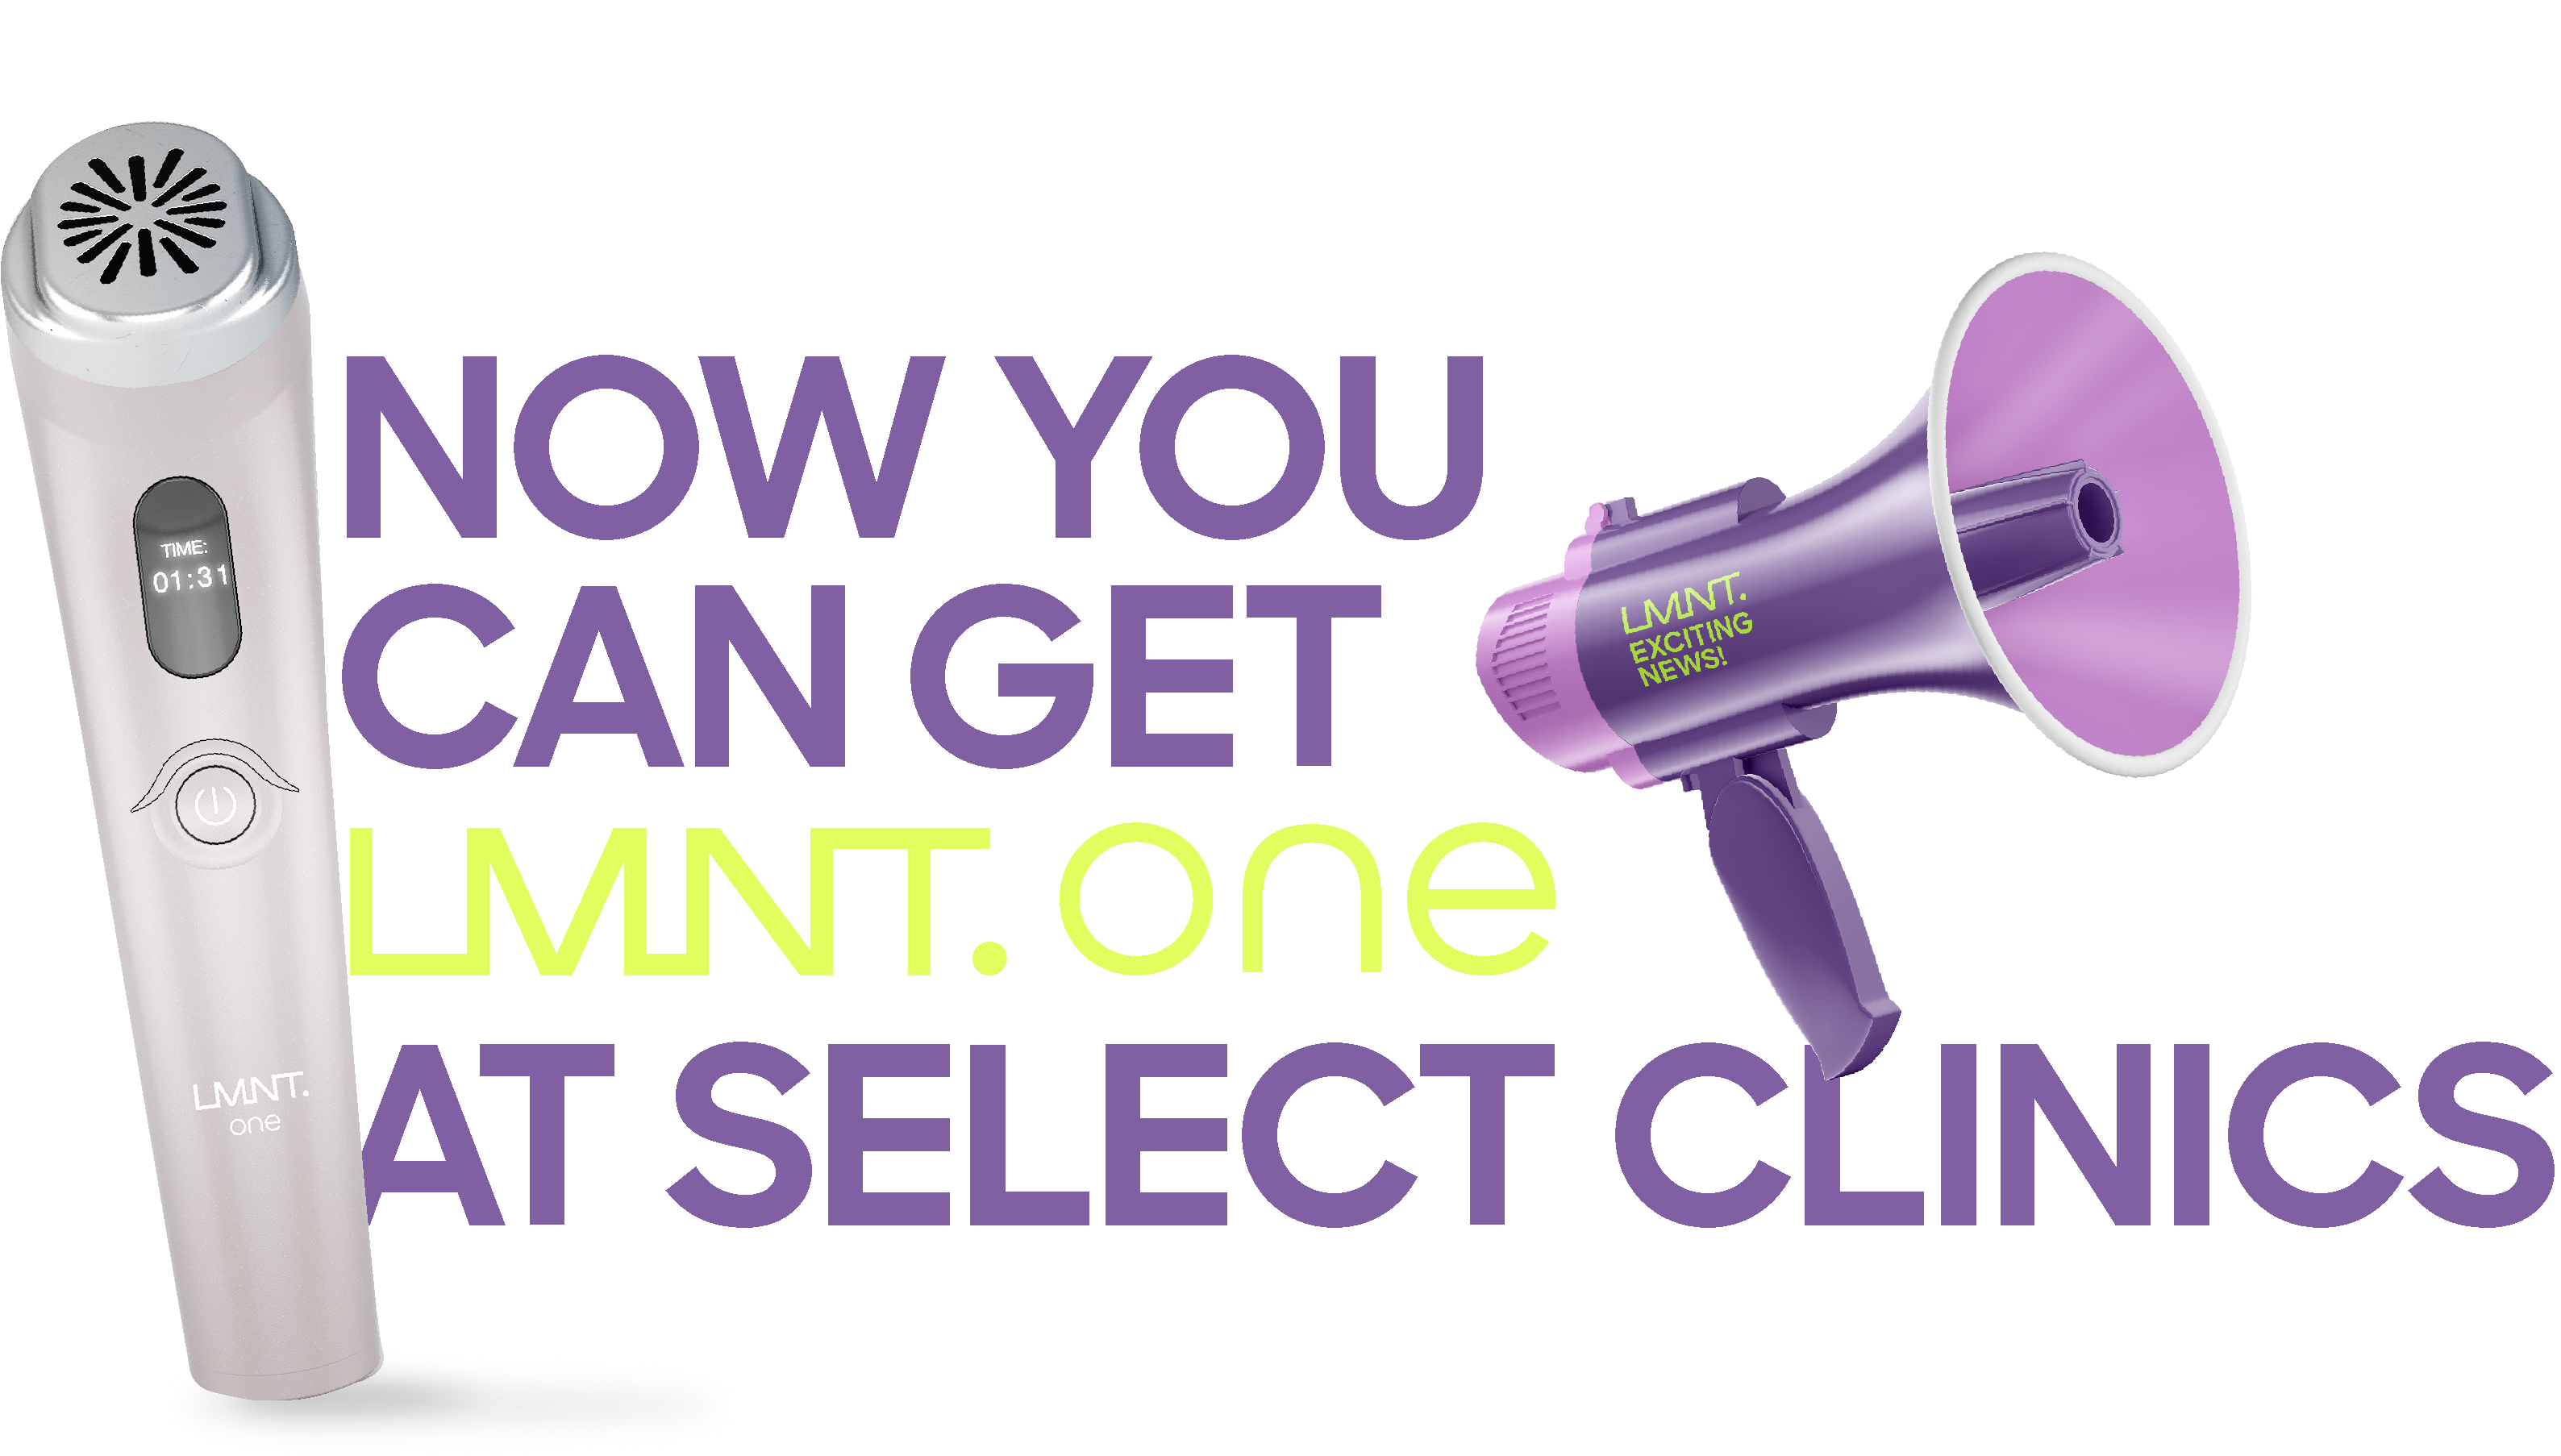 Now you can get LMNT.one at select clinics